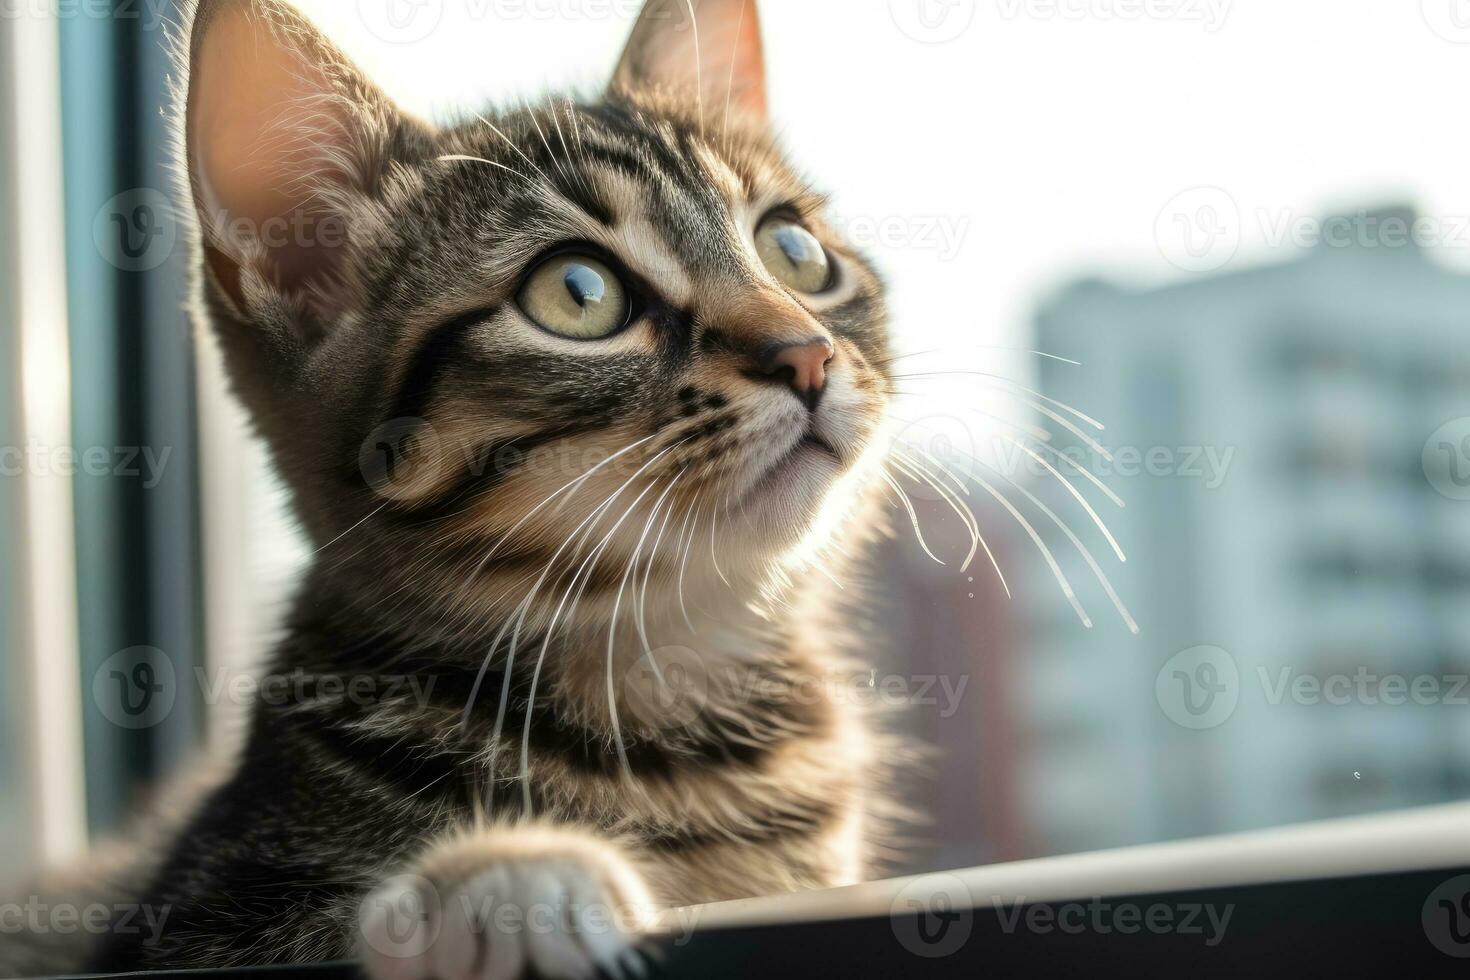 Lifestyle Cutie - A Curious Kitten in Soft Focus Urban Setting - AI generated photo